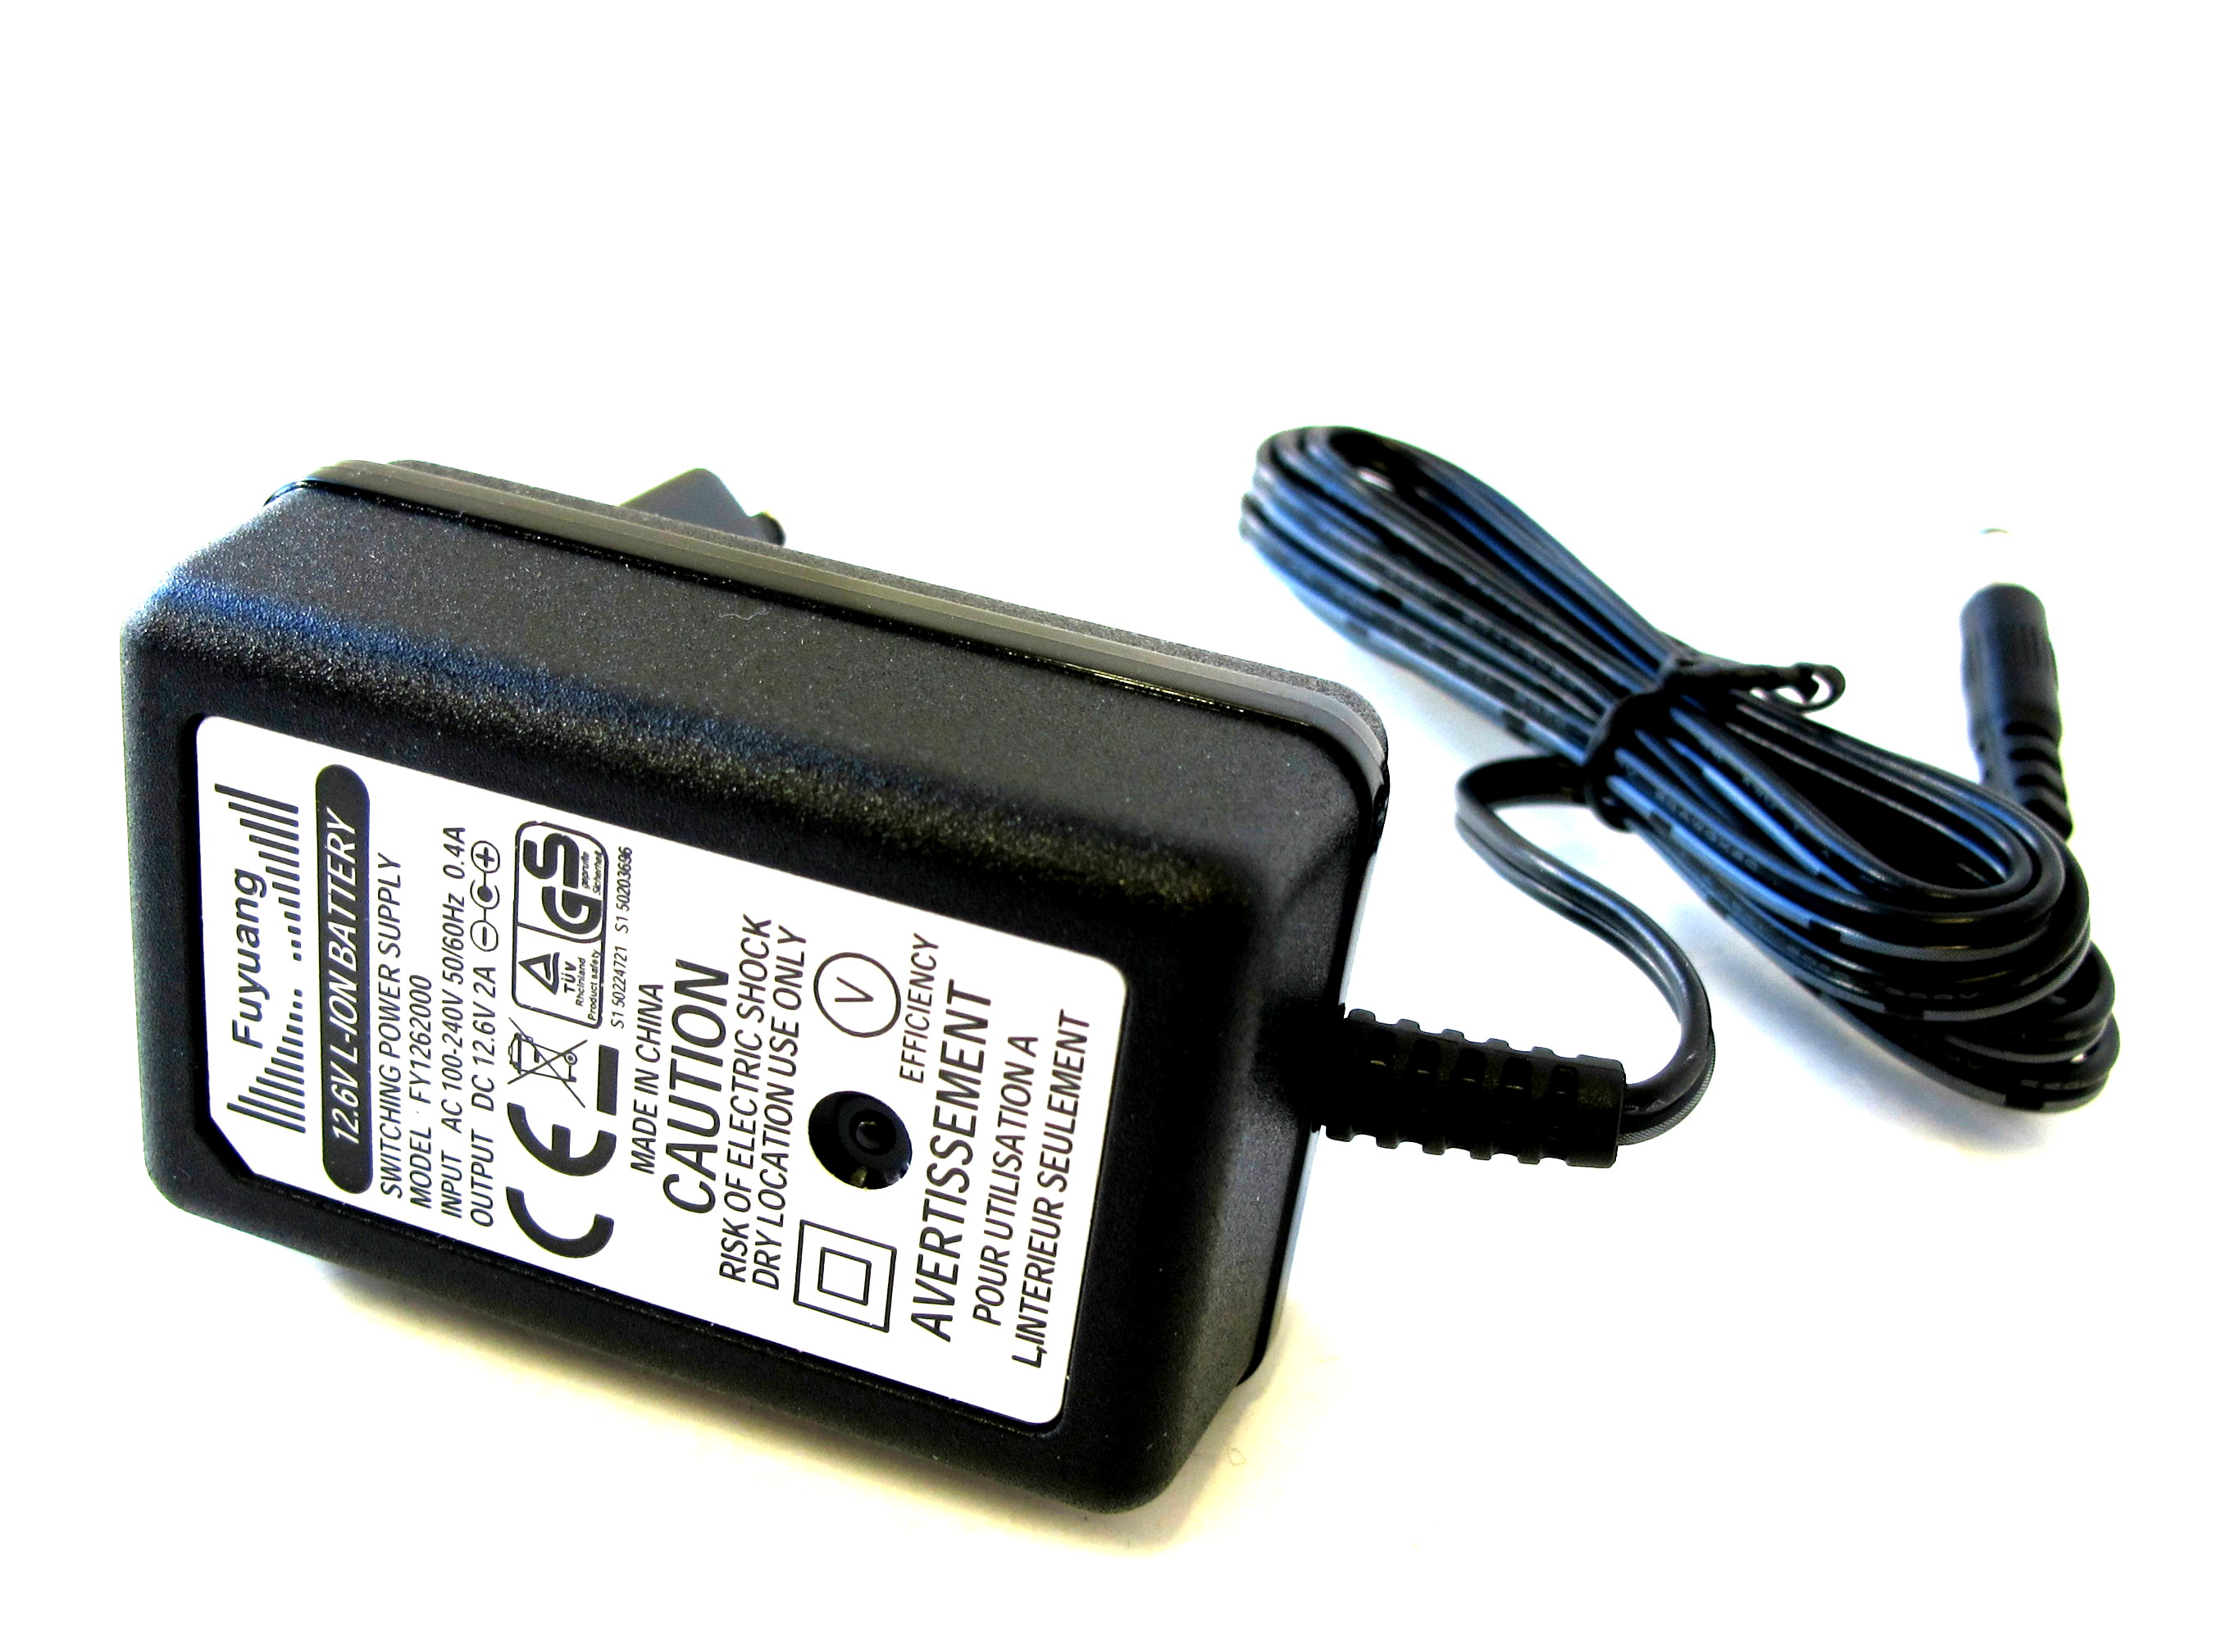 Enerpower_3S_Charger